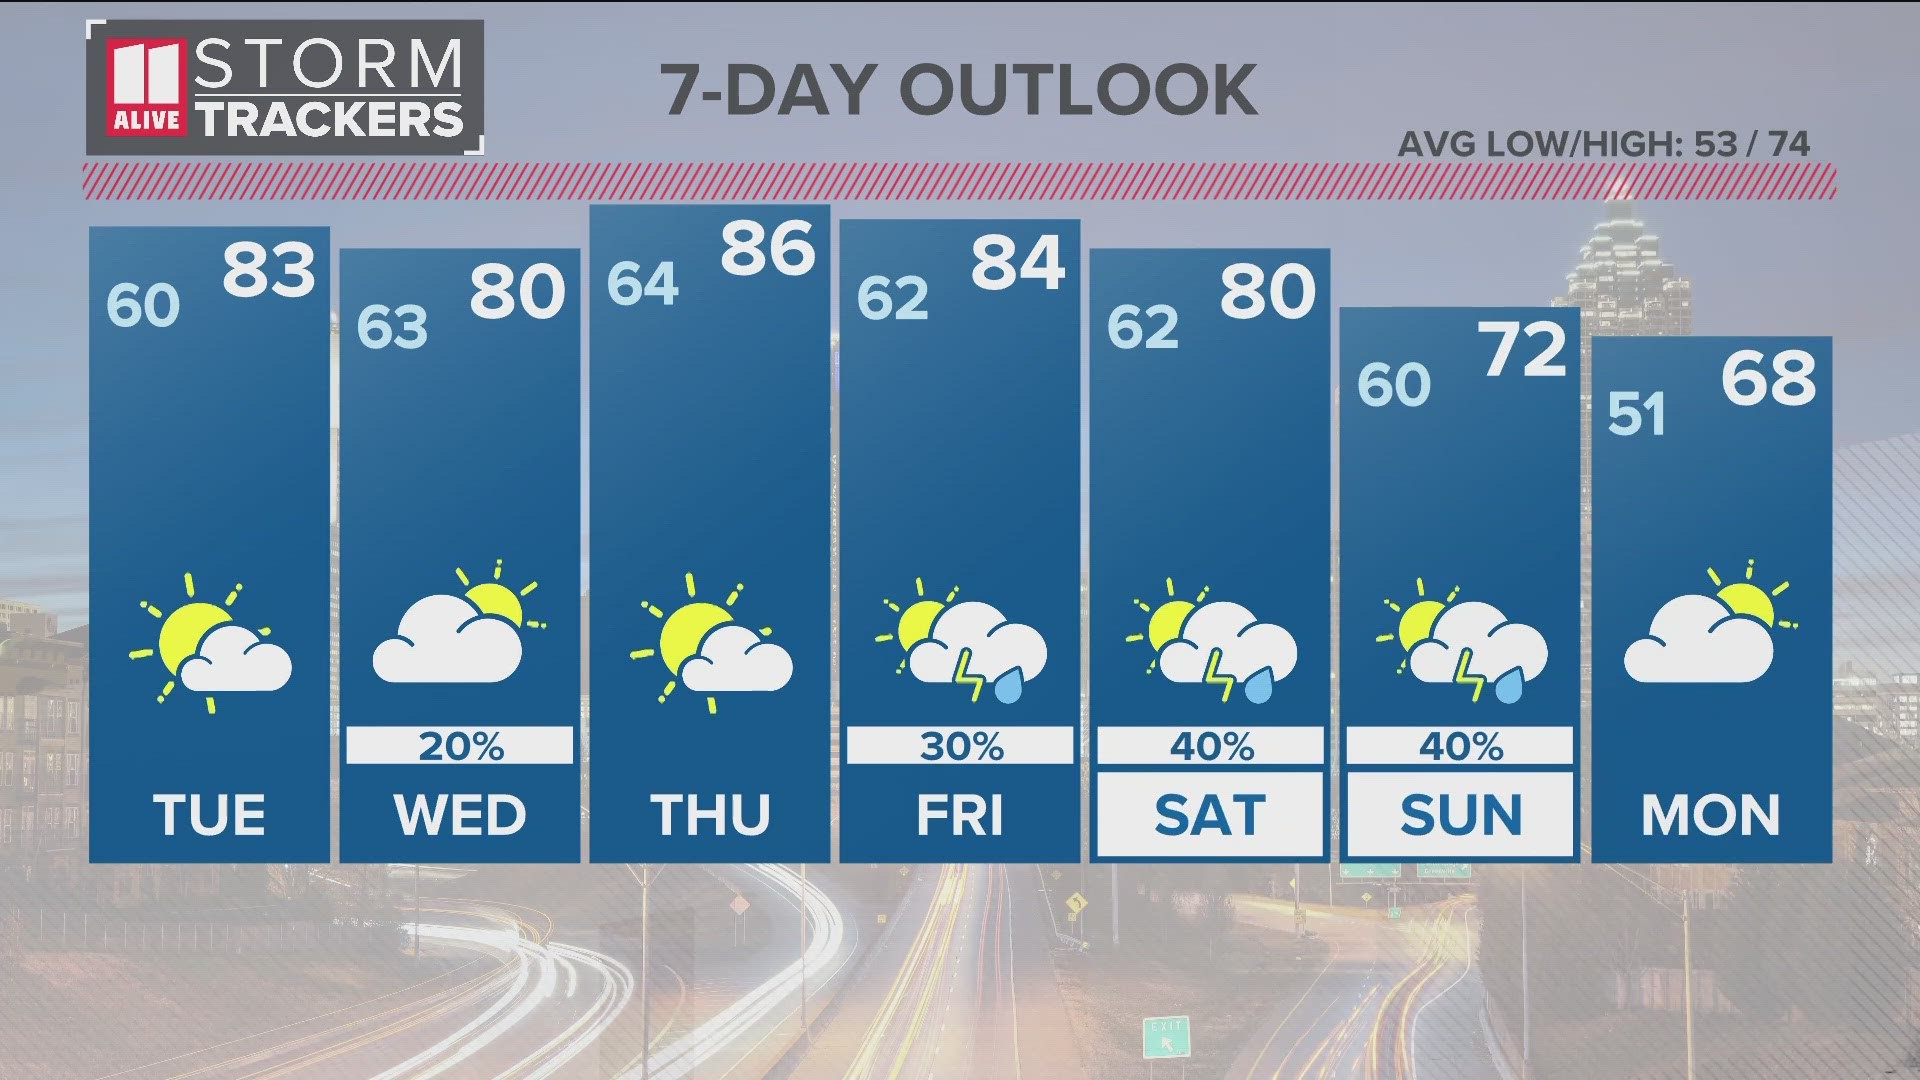 Building cloud cover, isolated showers on Wednesday.